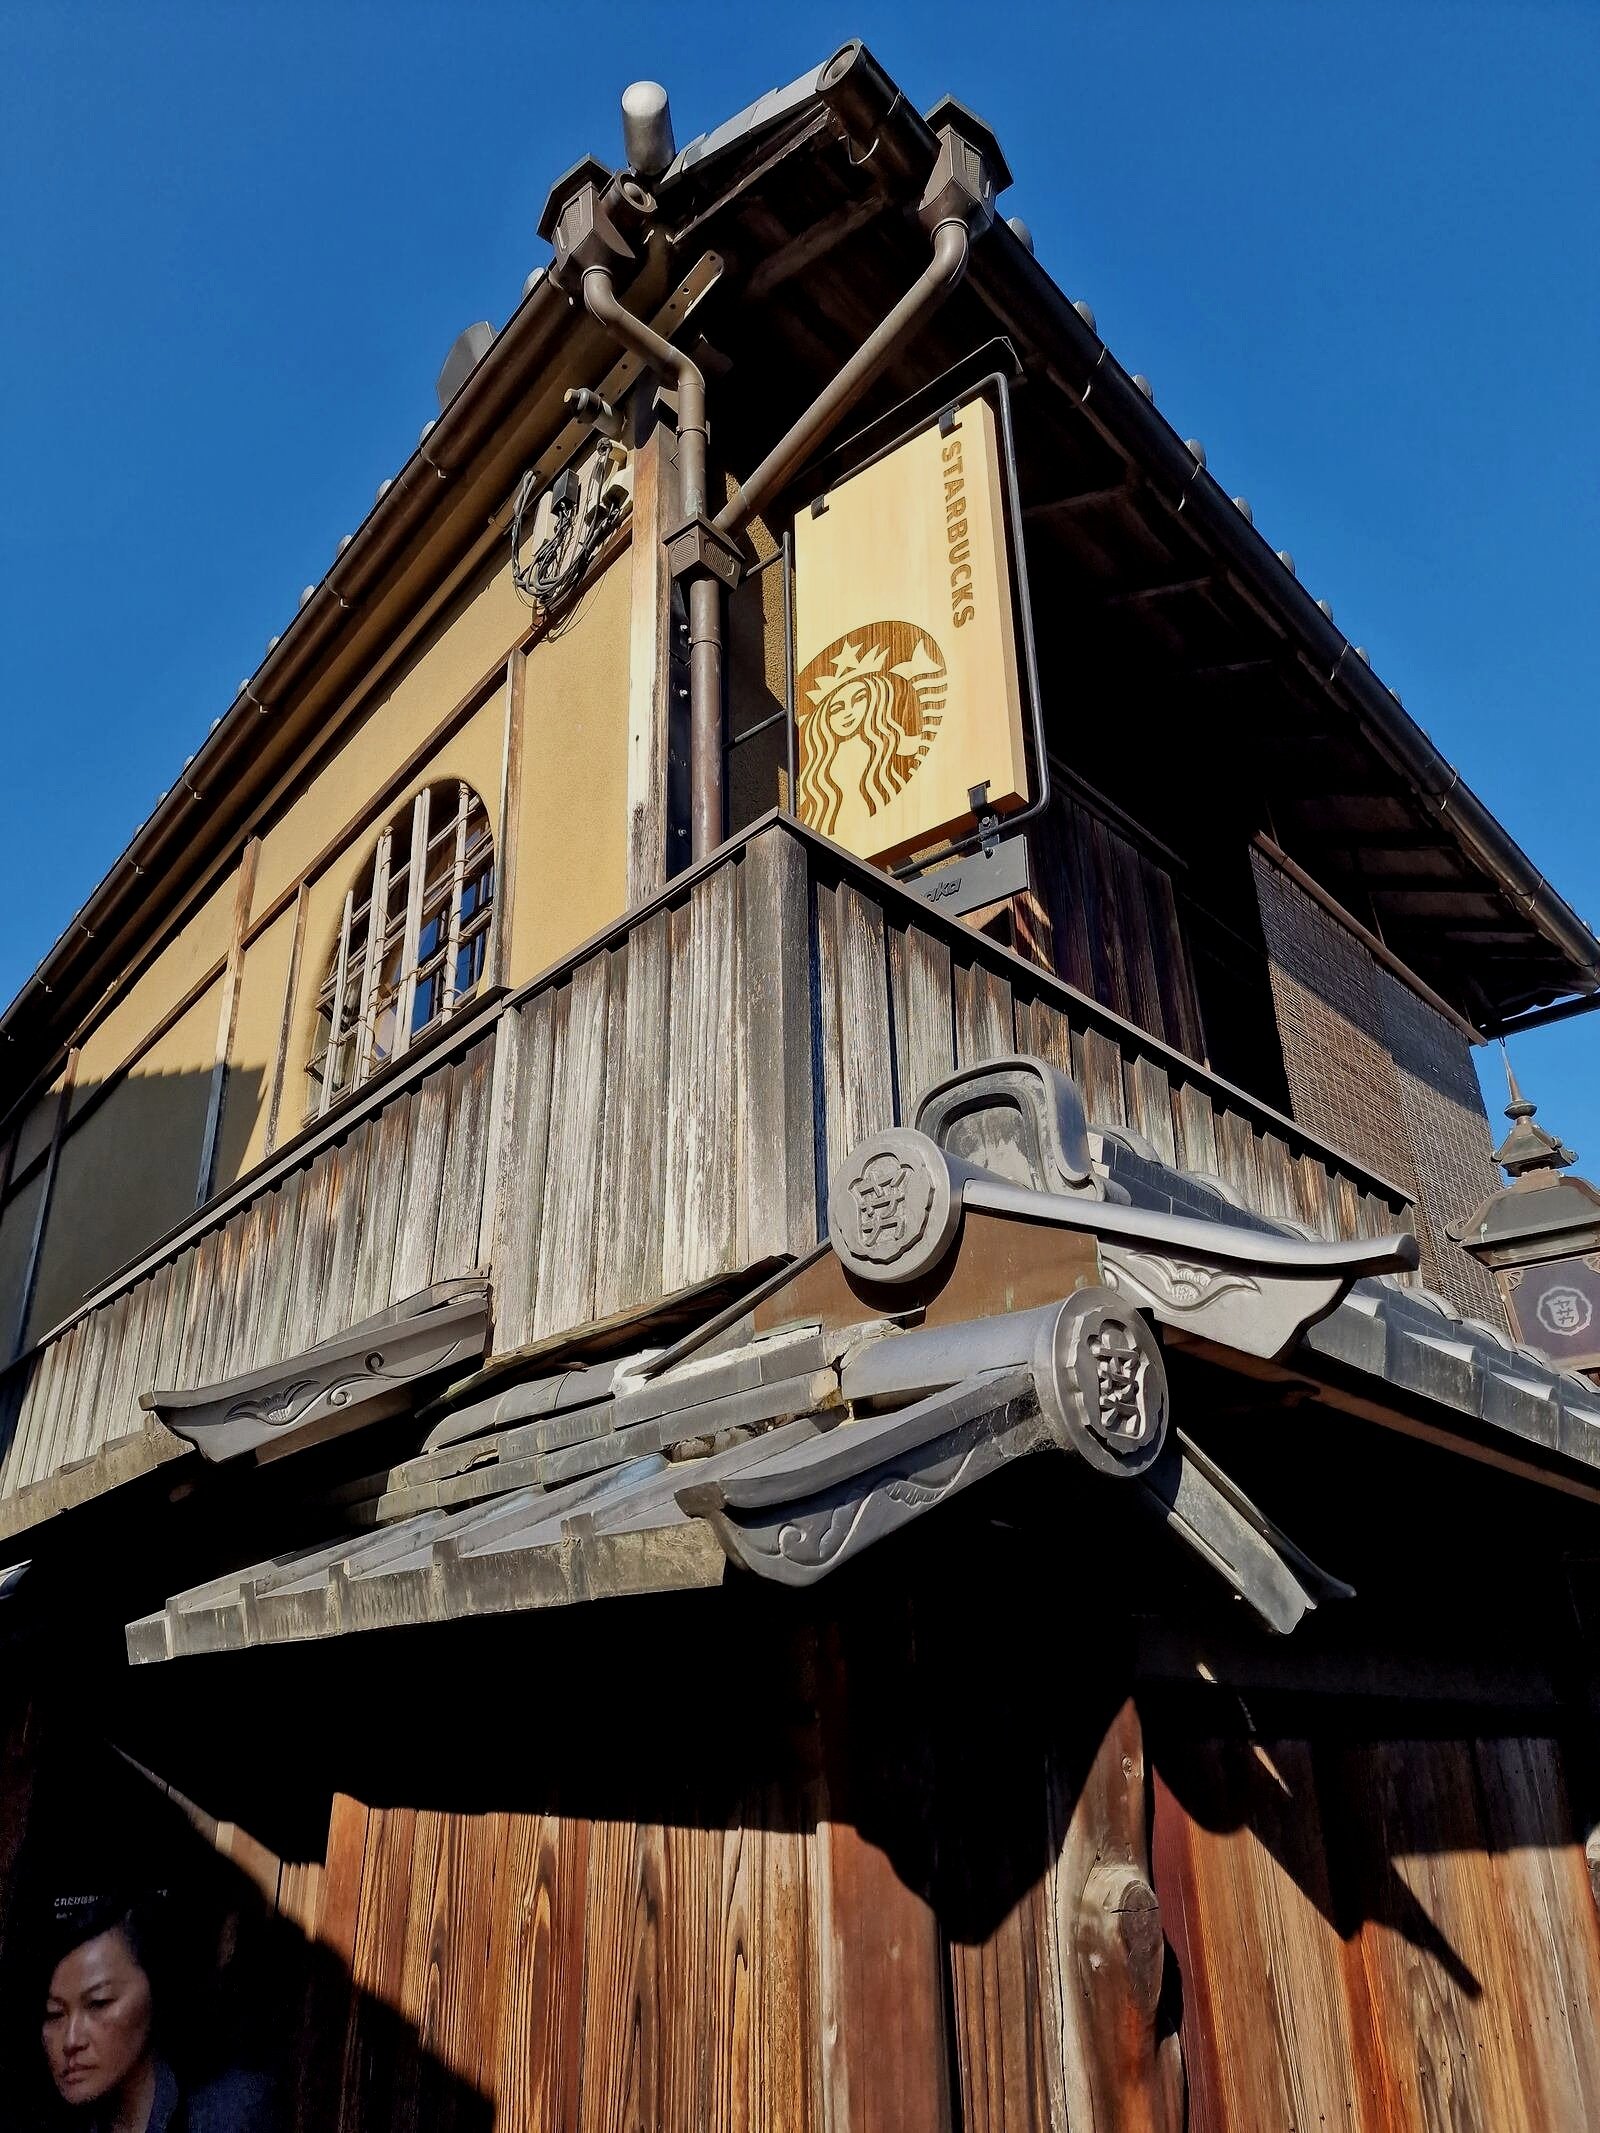 a traditional wooden Japanese house with the Starbucks logo on the side